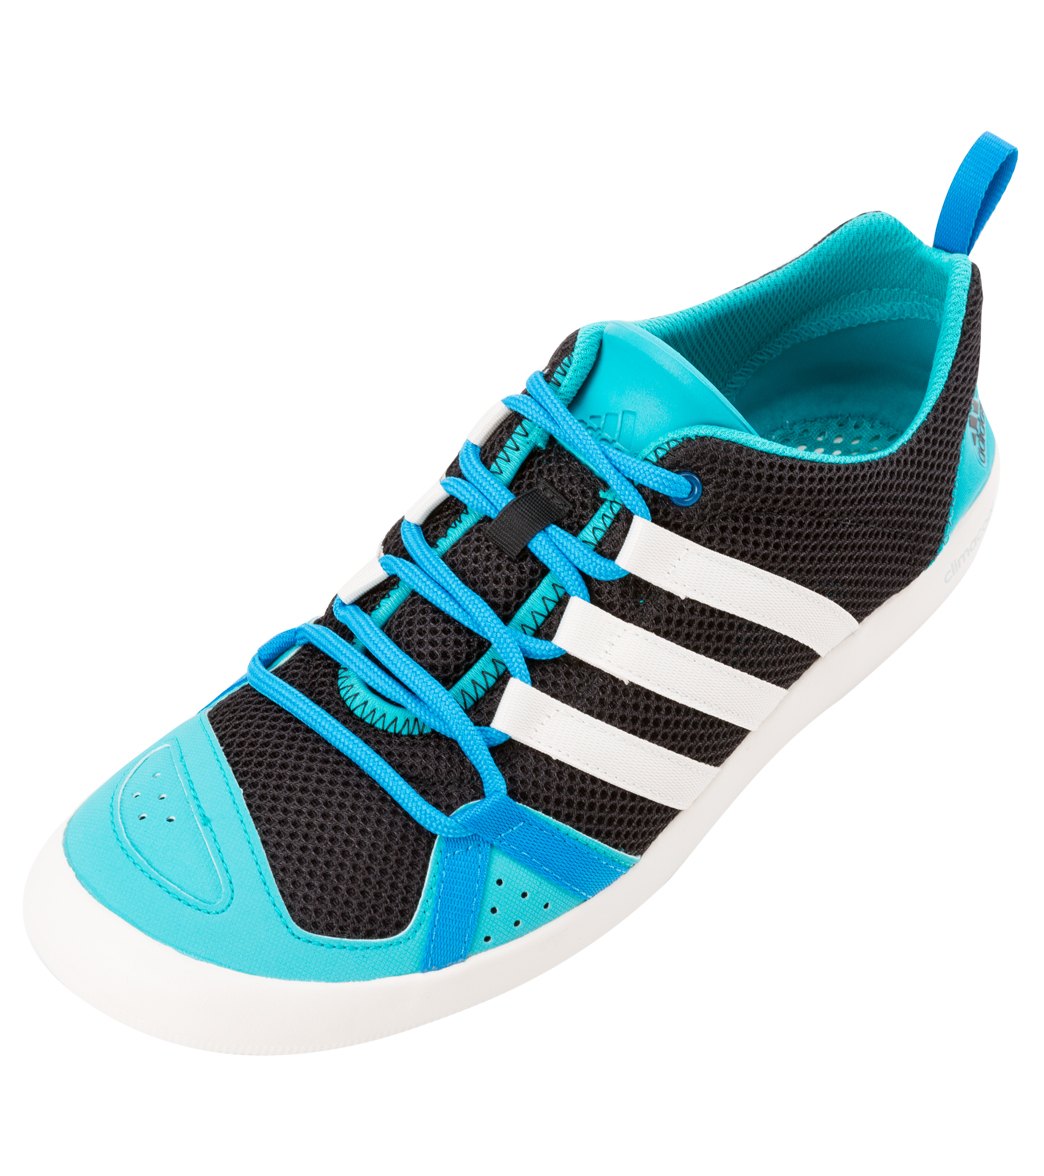 Adidas Men's Climacool Boat Lace Water at SwimOutlet.com